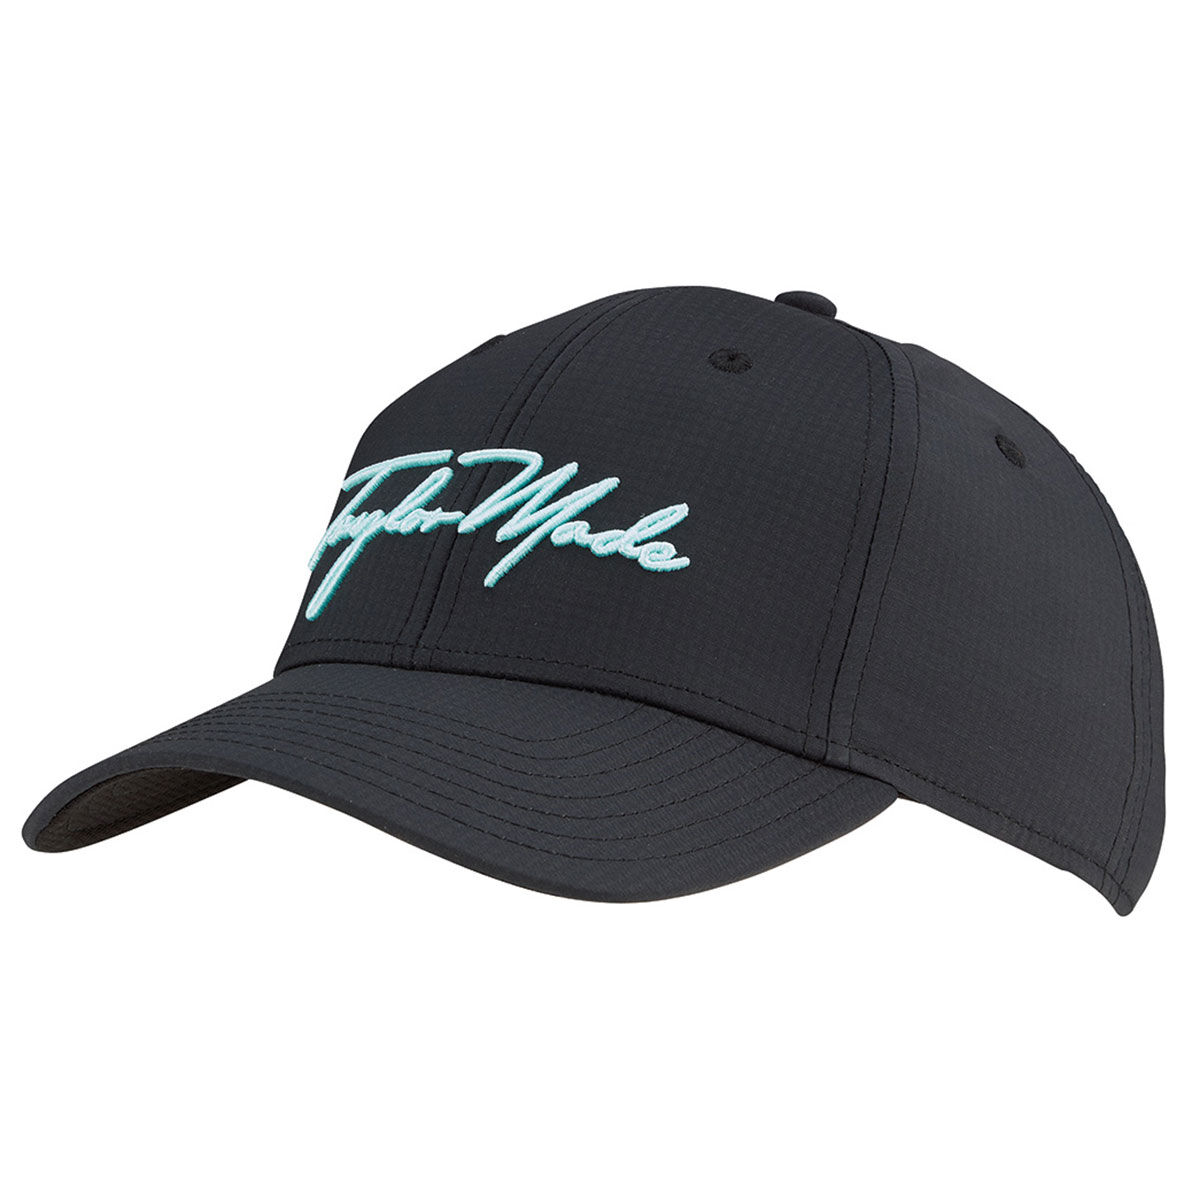 TaylorMade Women's Black and Blue Comfortable Embroidered Script Golf Cap | American Golf, One Size von TaylorMade